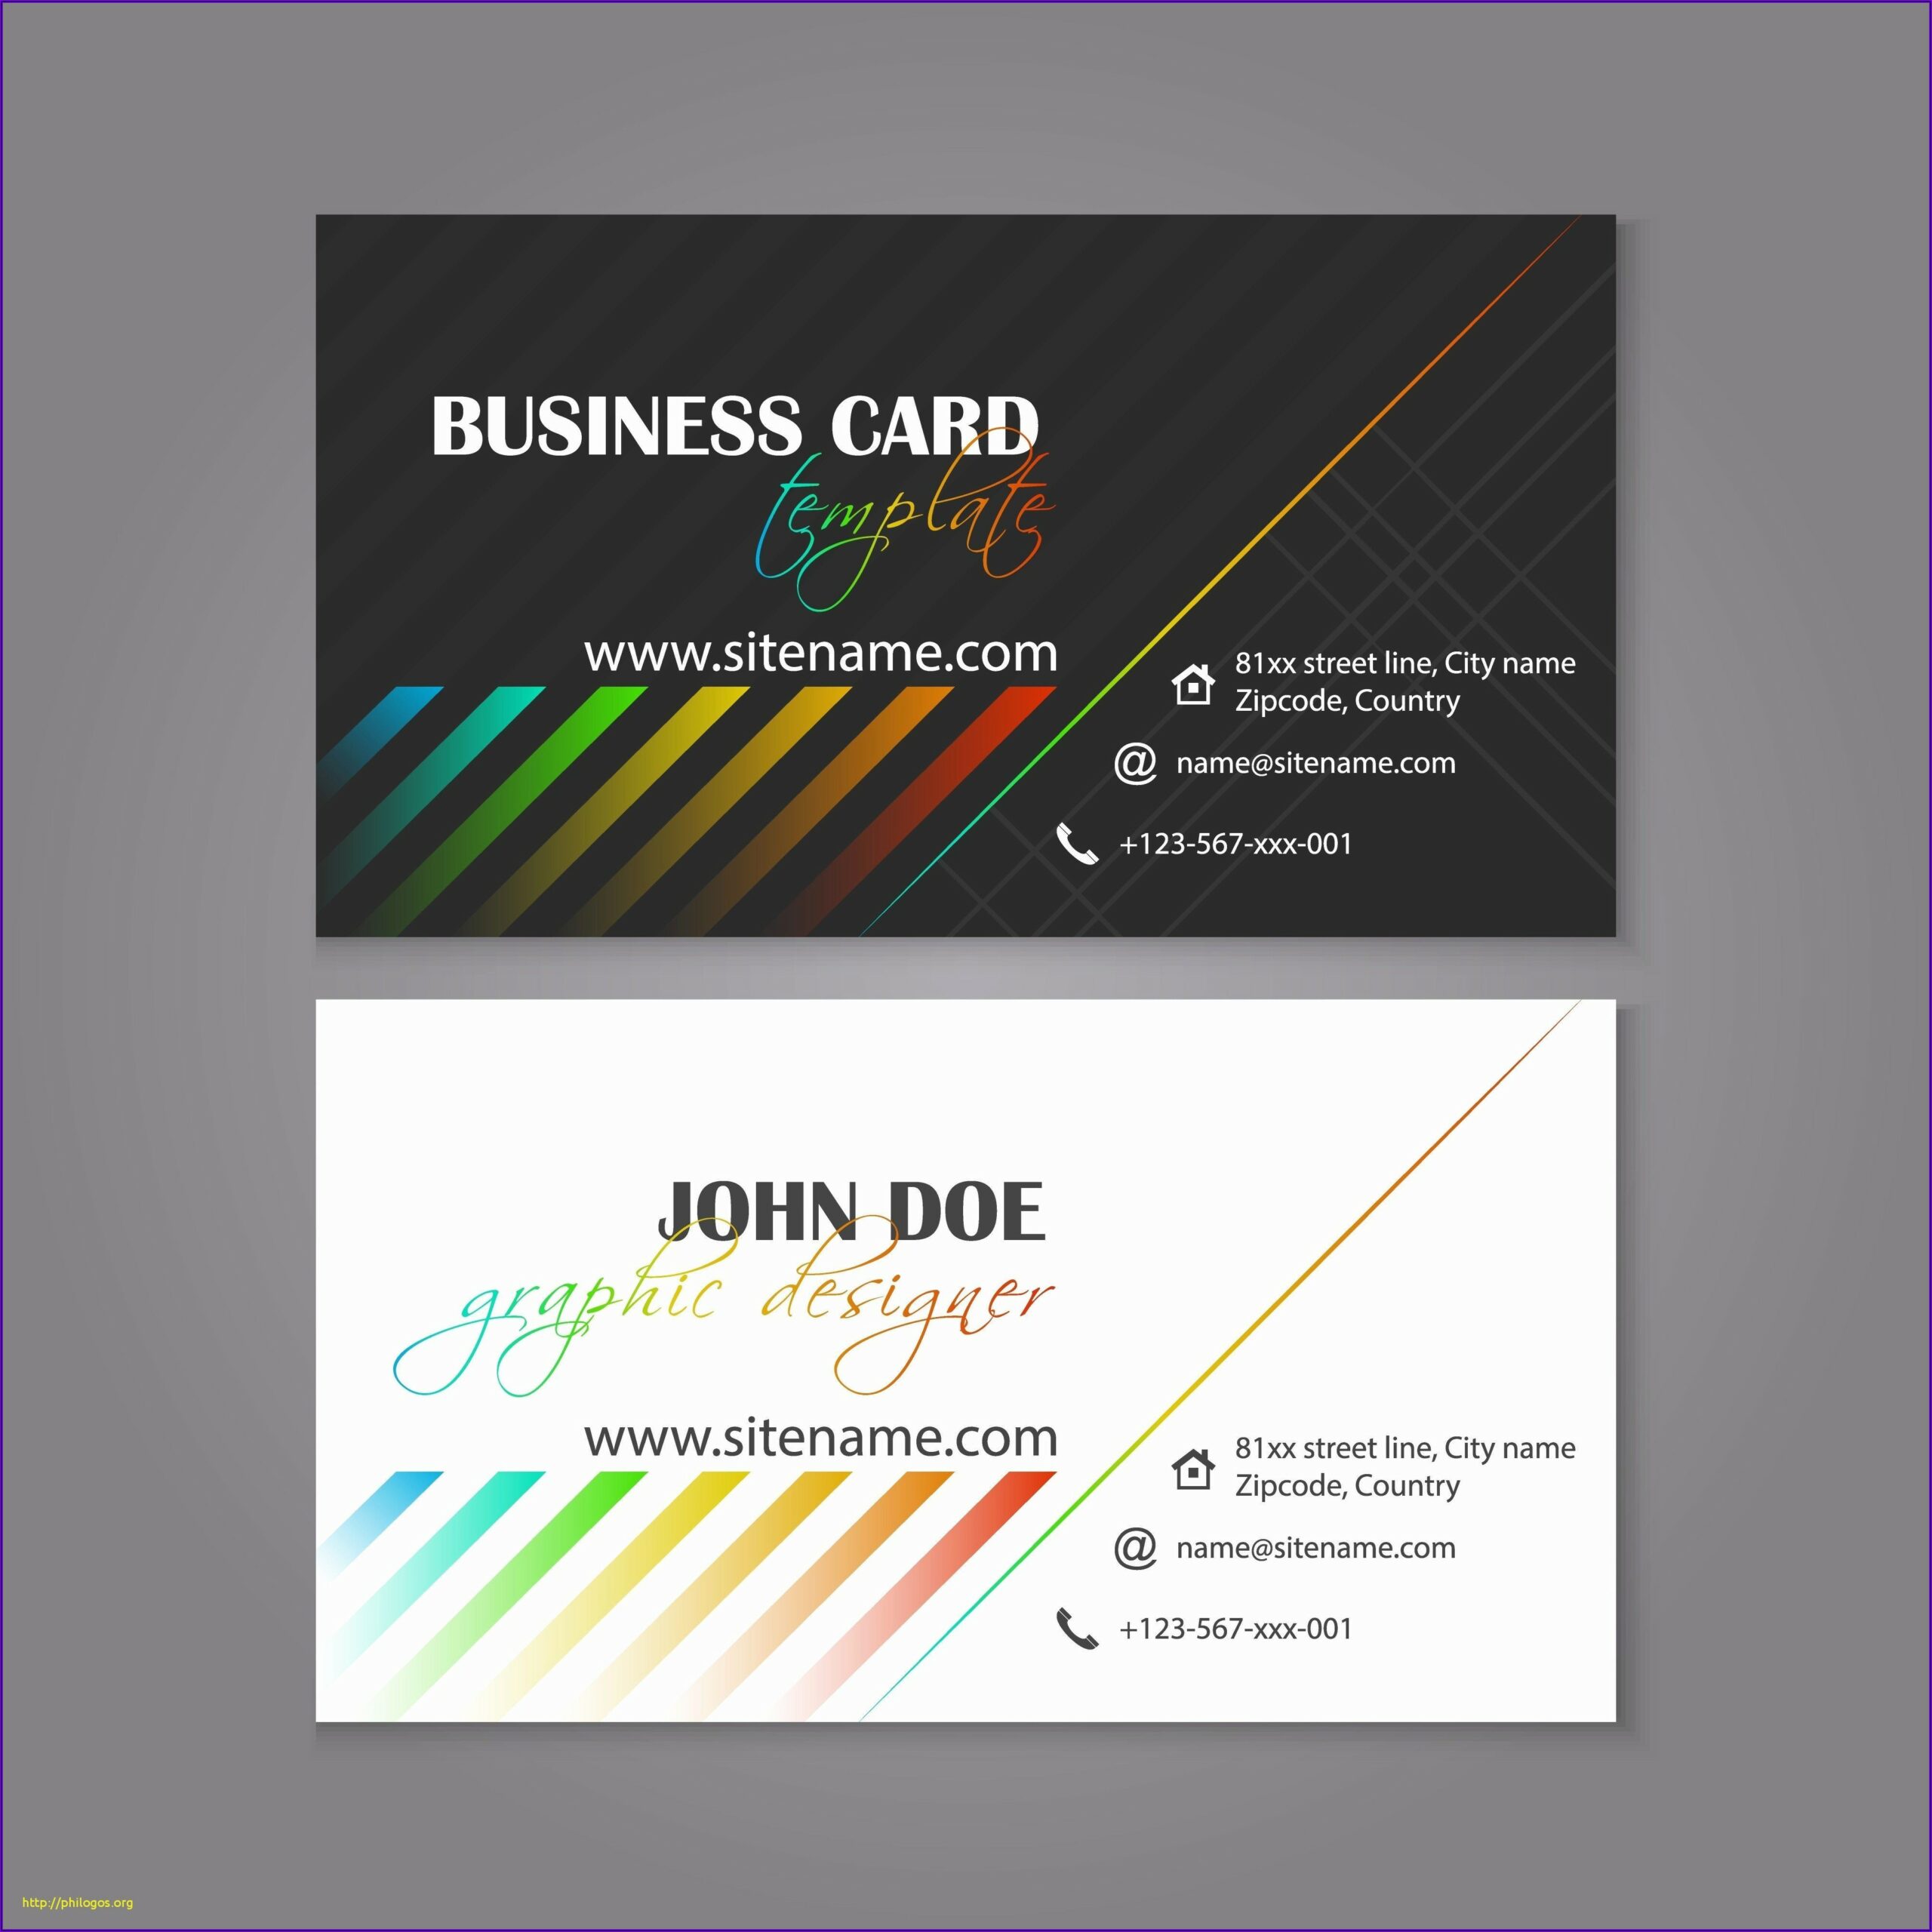 Double Sided Business Card Template Illustrator